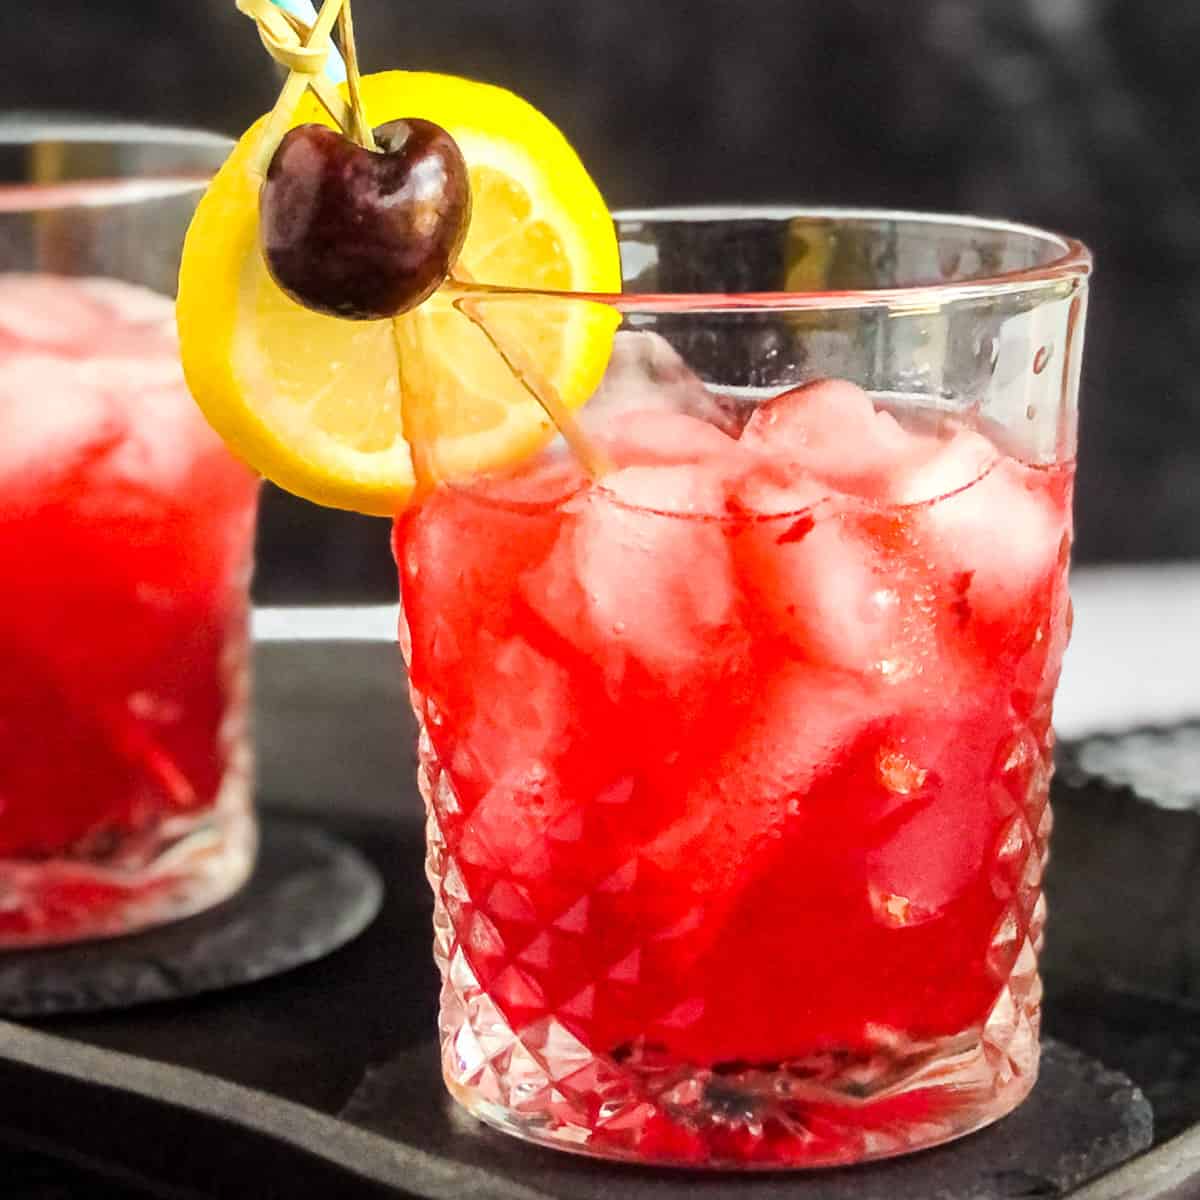 Cherry Vodka Sour garnished with a cherry and lemon wheel.